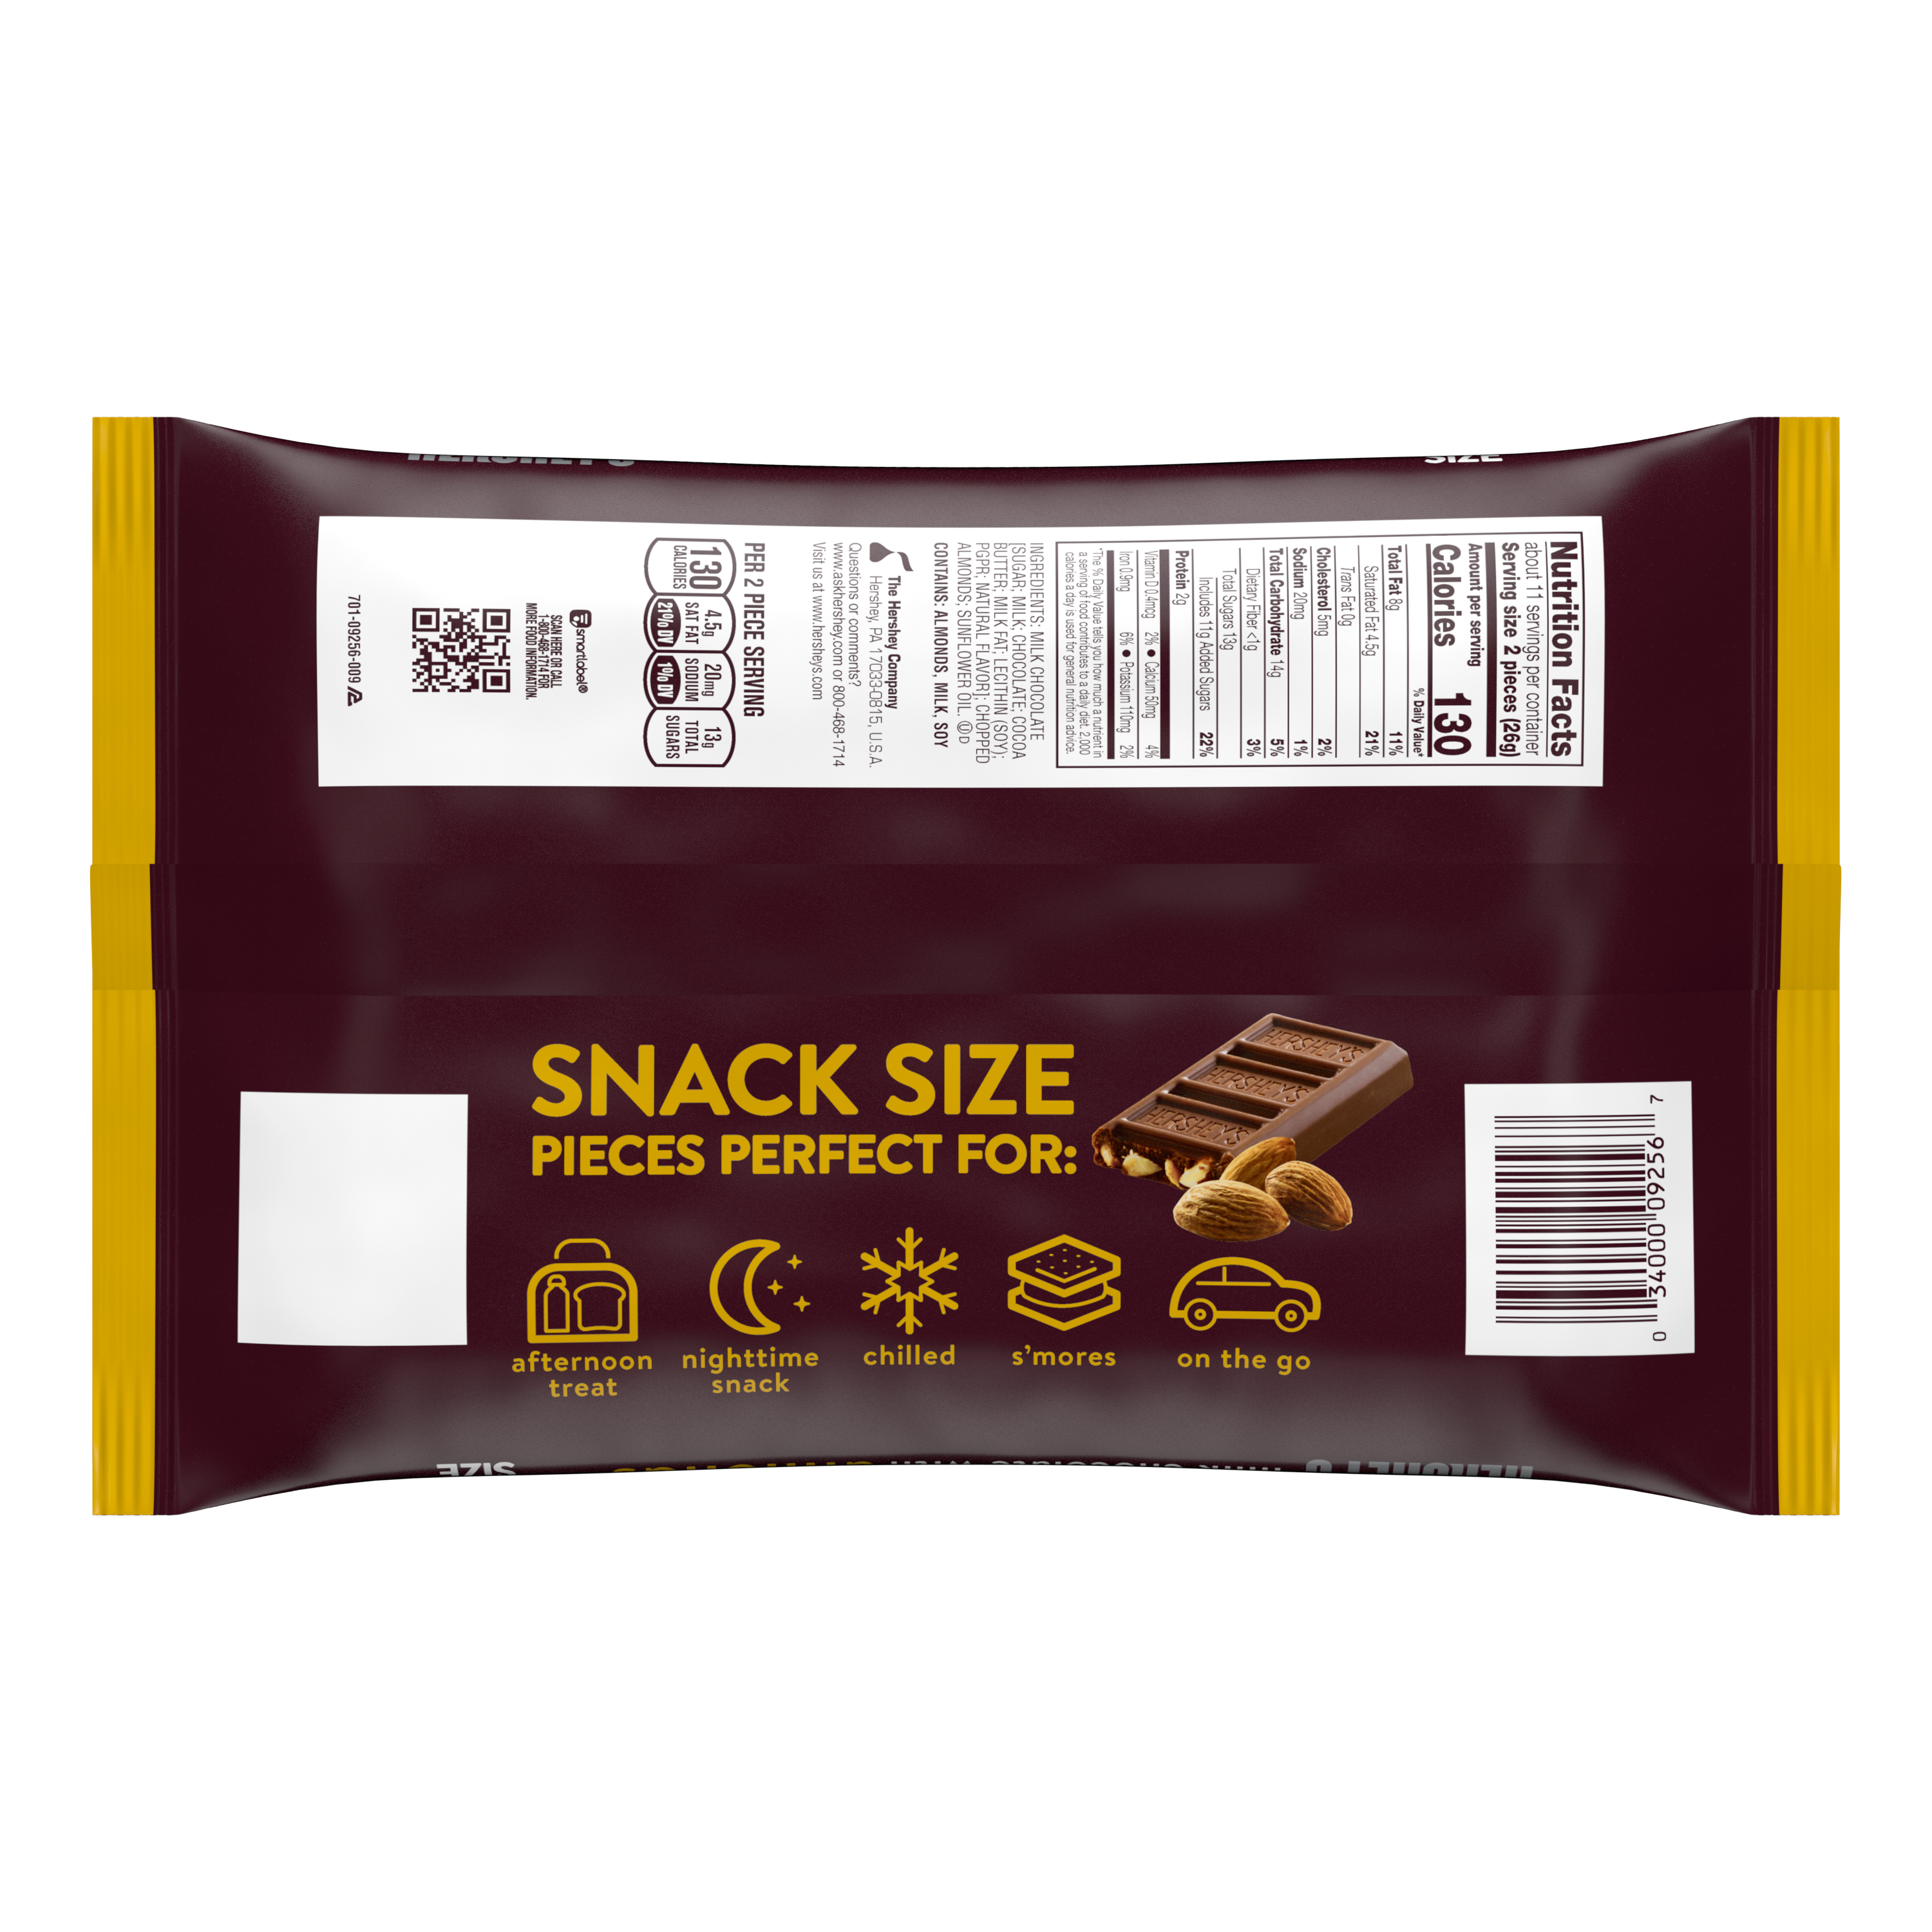 HERSHEY'S Milk Chocolate with Almonds Snack Size Candy Bars, 10.35 oz bag - Back of Package